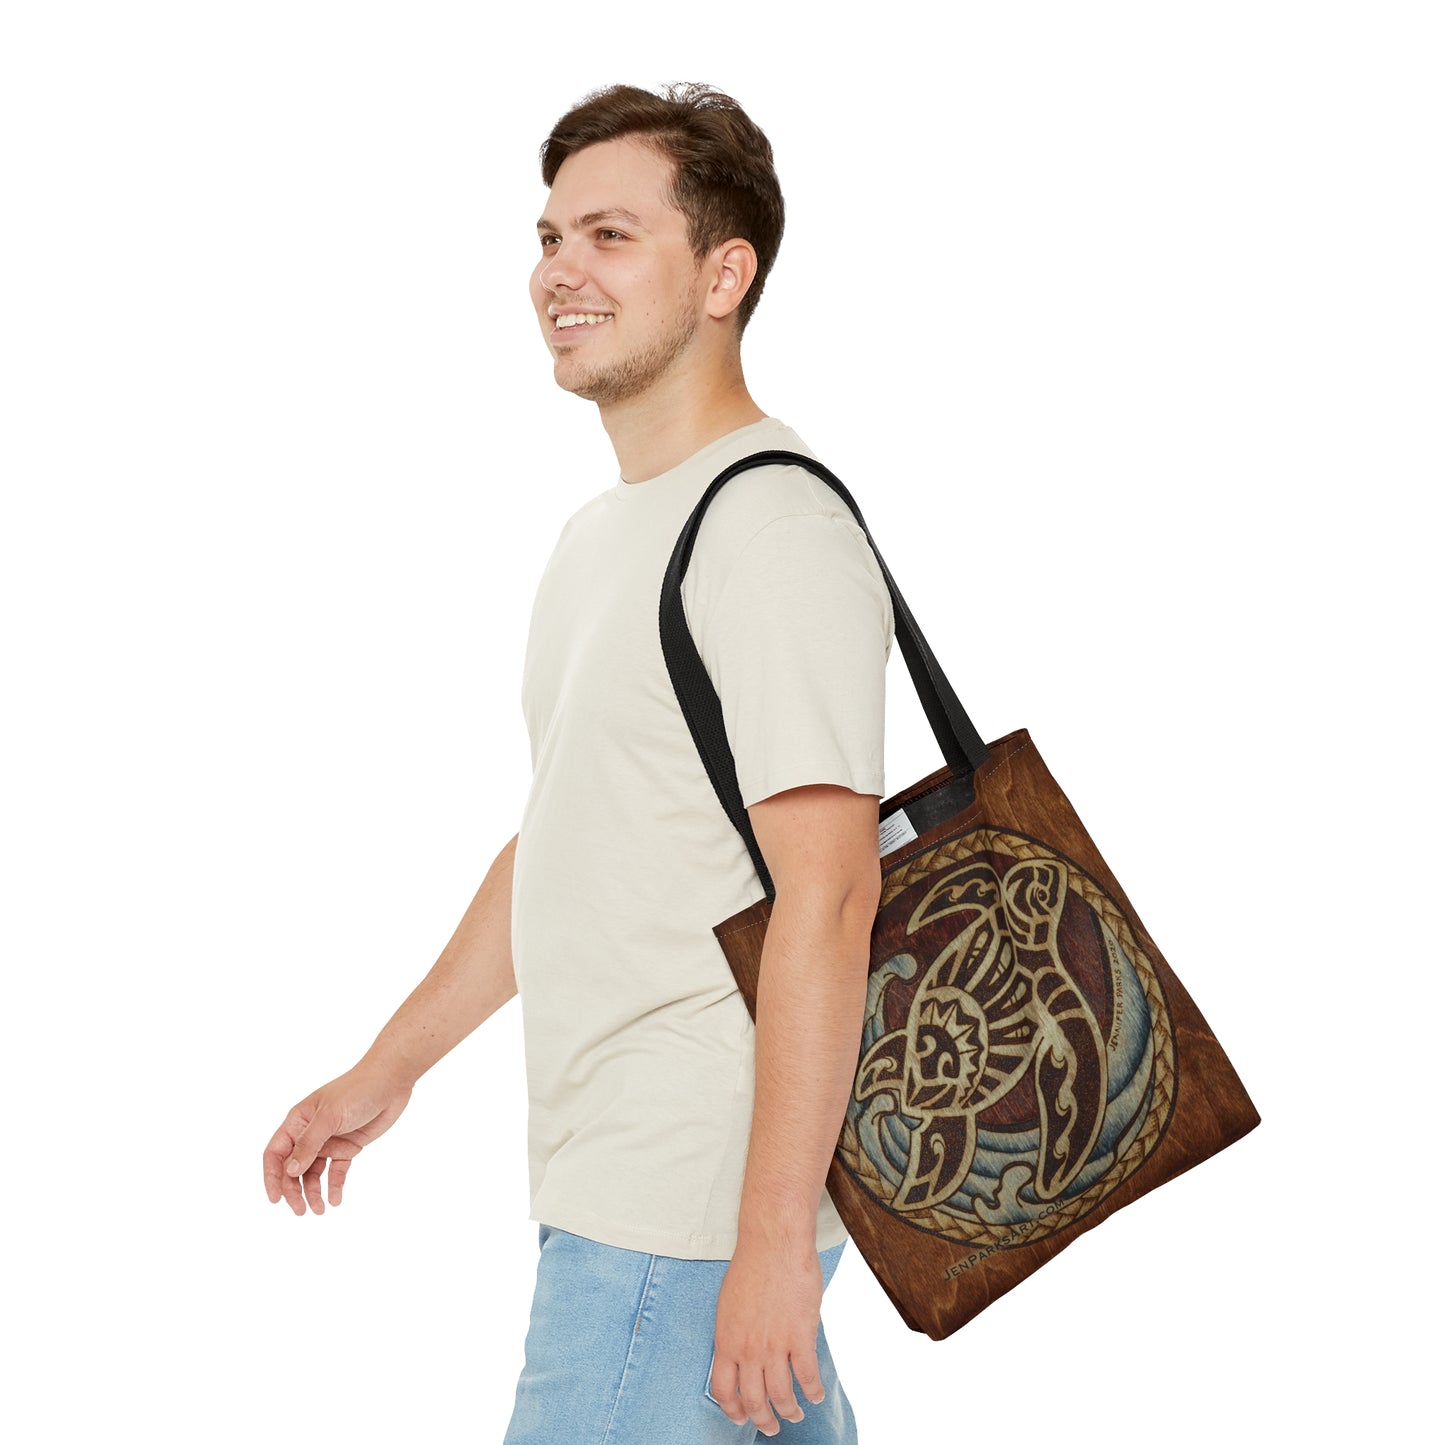 Art Tote Bag Forever Turtle